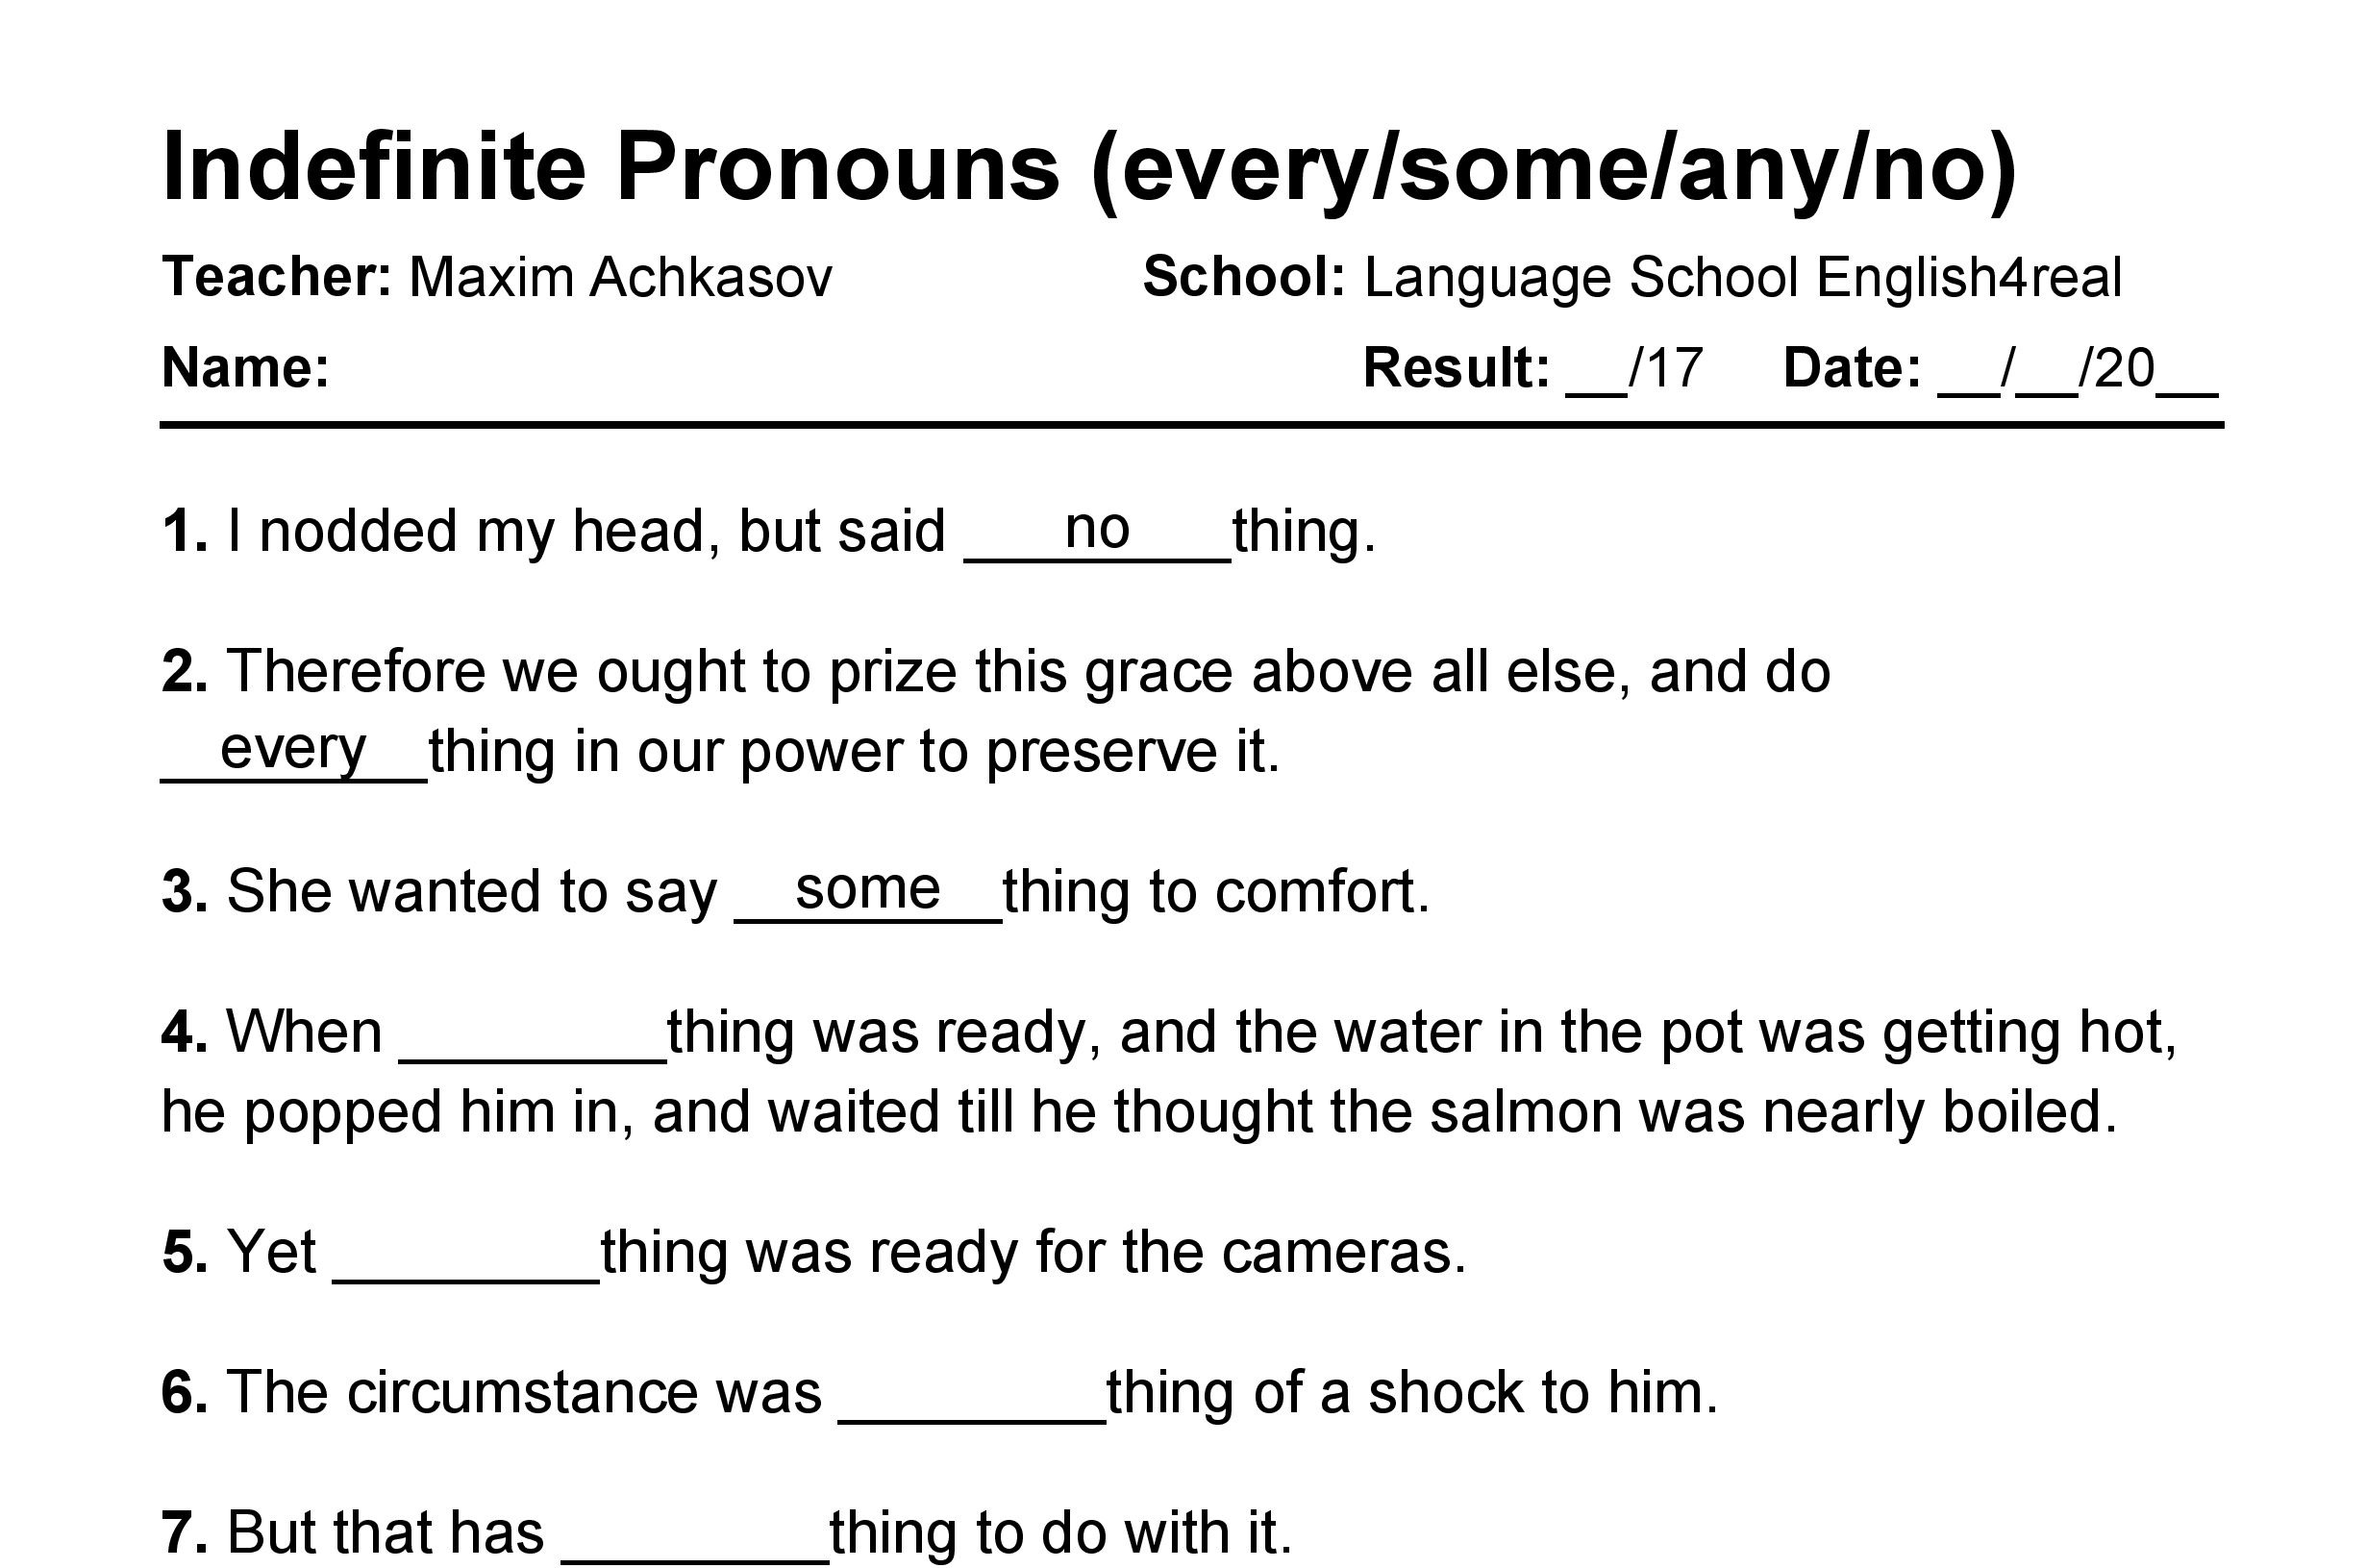 Indefinite Pronouns English Grammar Fill In The Blanks Exercises With 